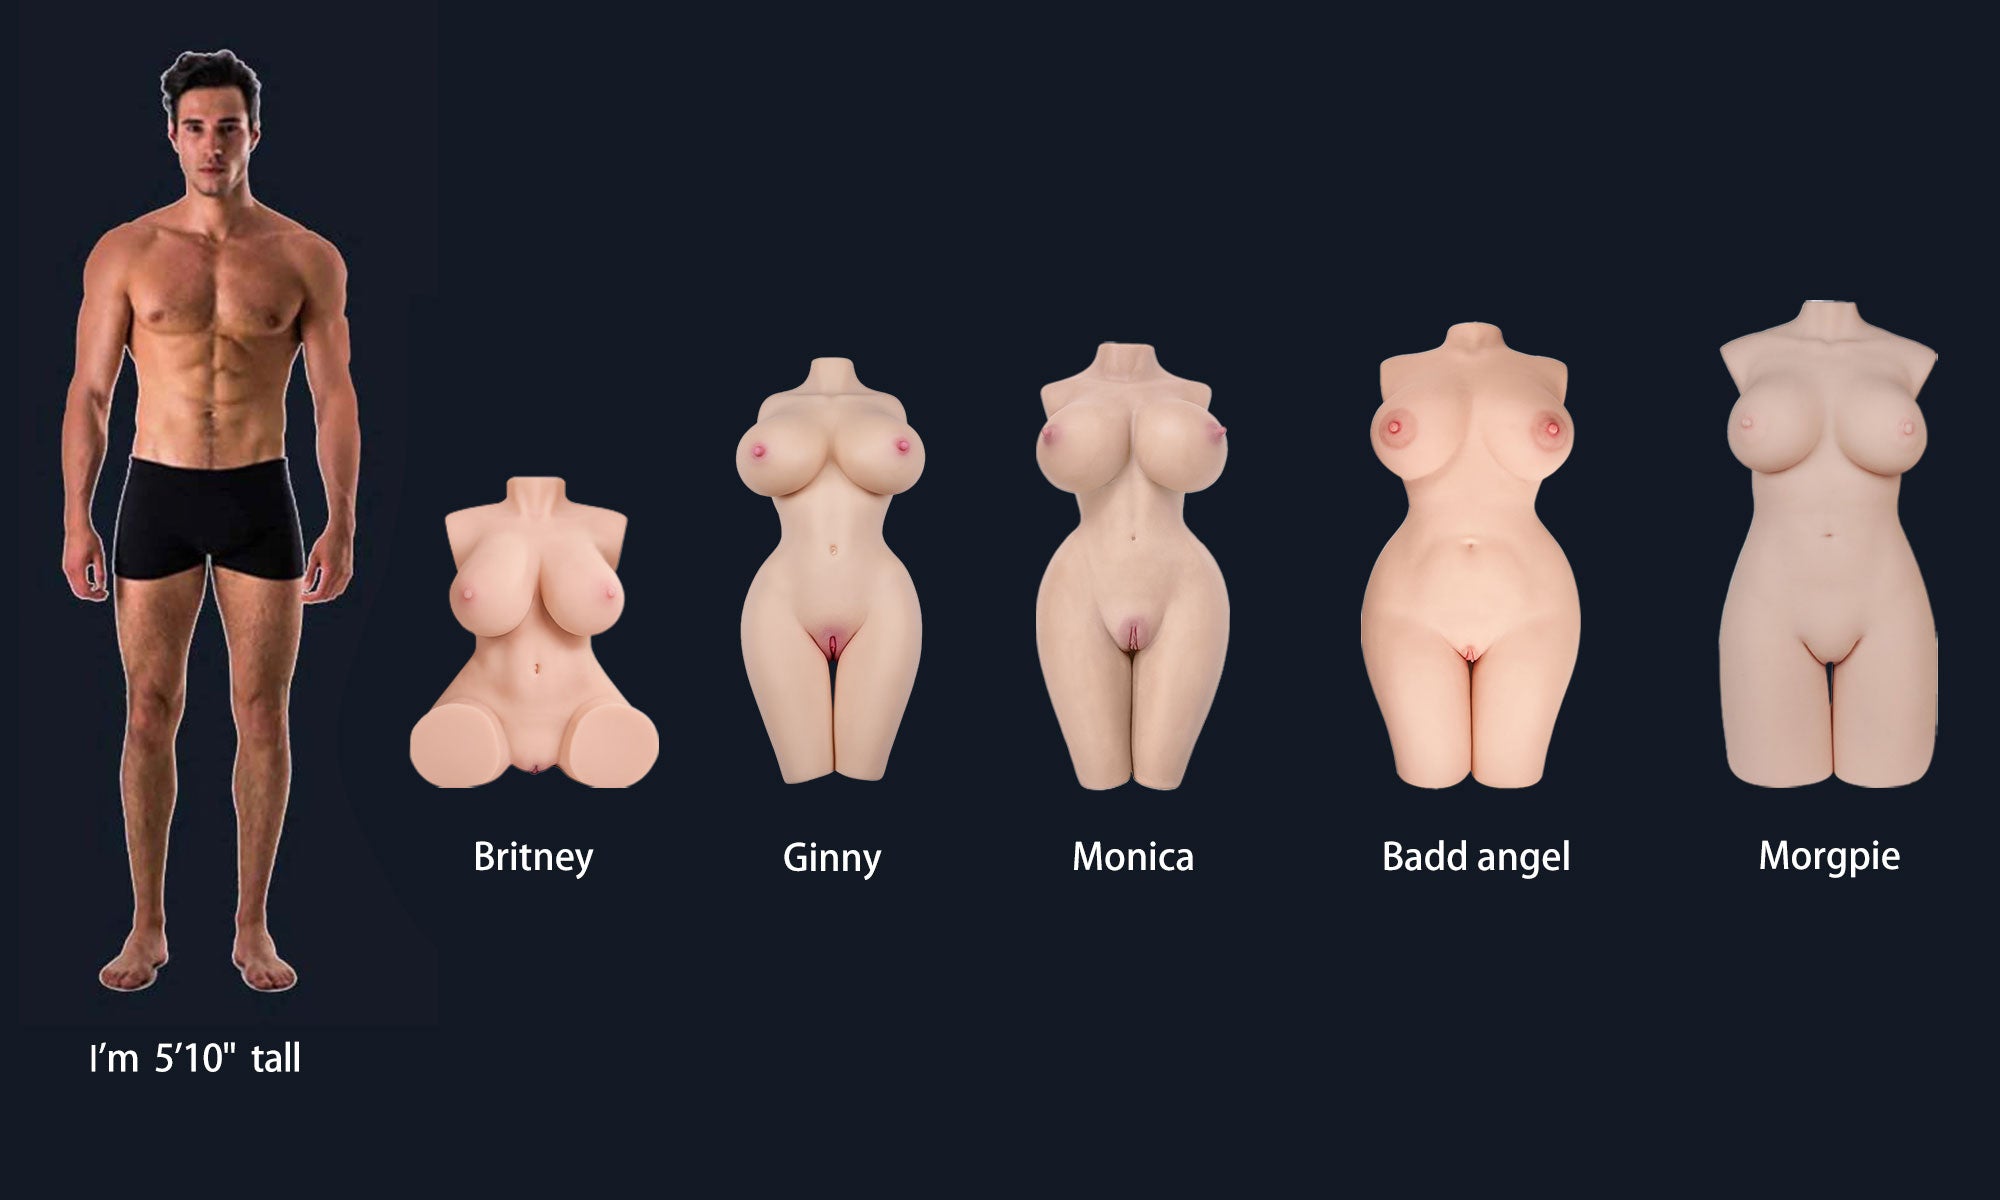 morgpie doll comparison with other hot dolls.jpg__PID:3cc1d614-6b50-4227-9638-cc55d0927fa2